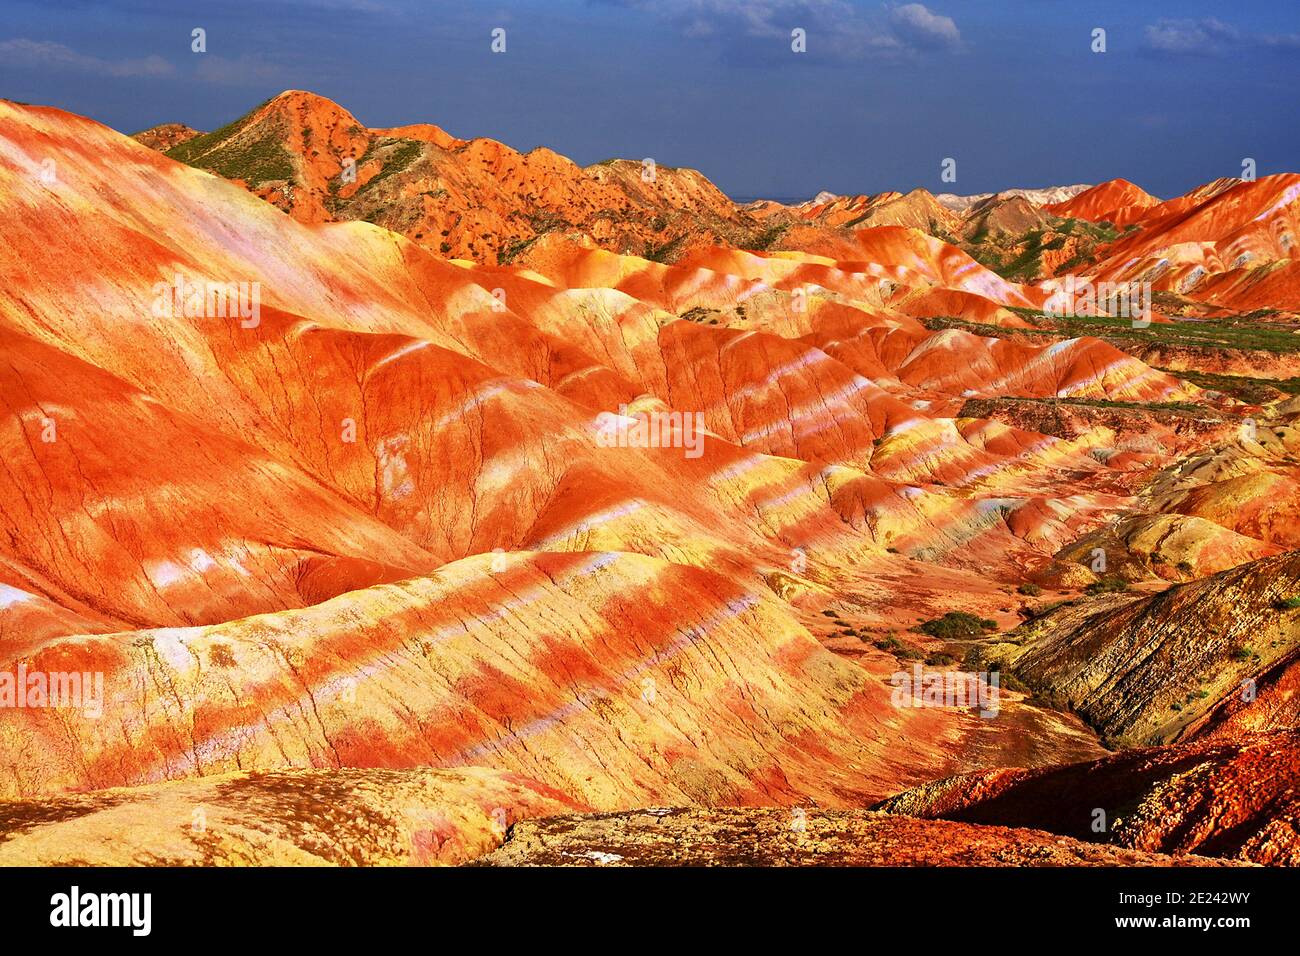 The Rainbow Mountains of China within the Zhangye Danxia Landform Geological Park are a geological wonder of the world. Stock Photo